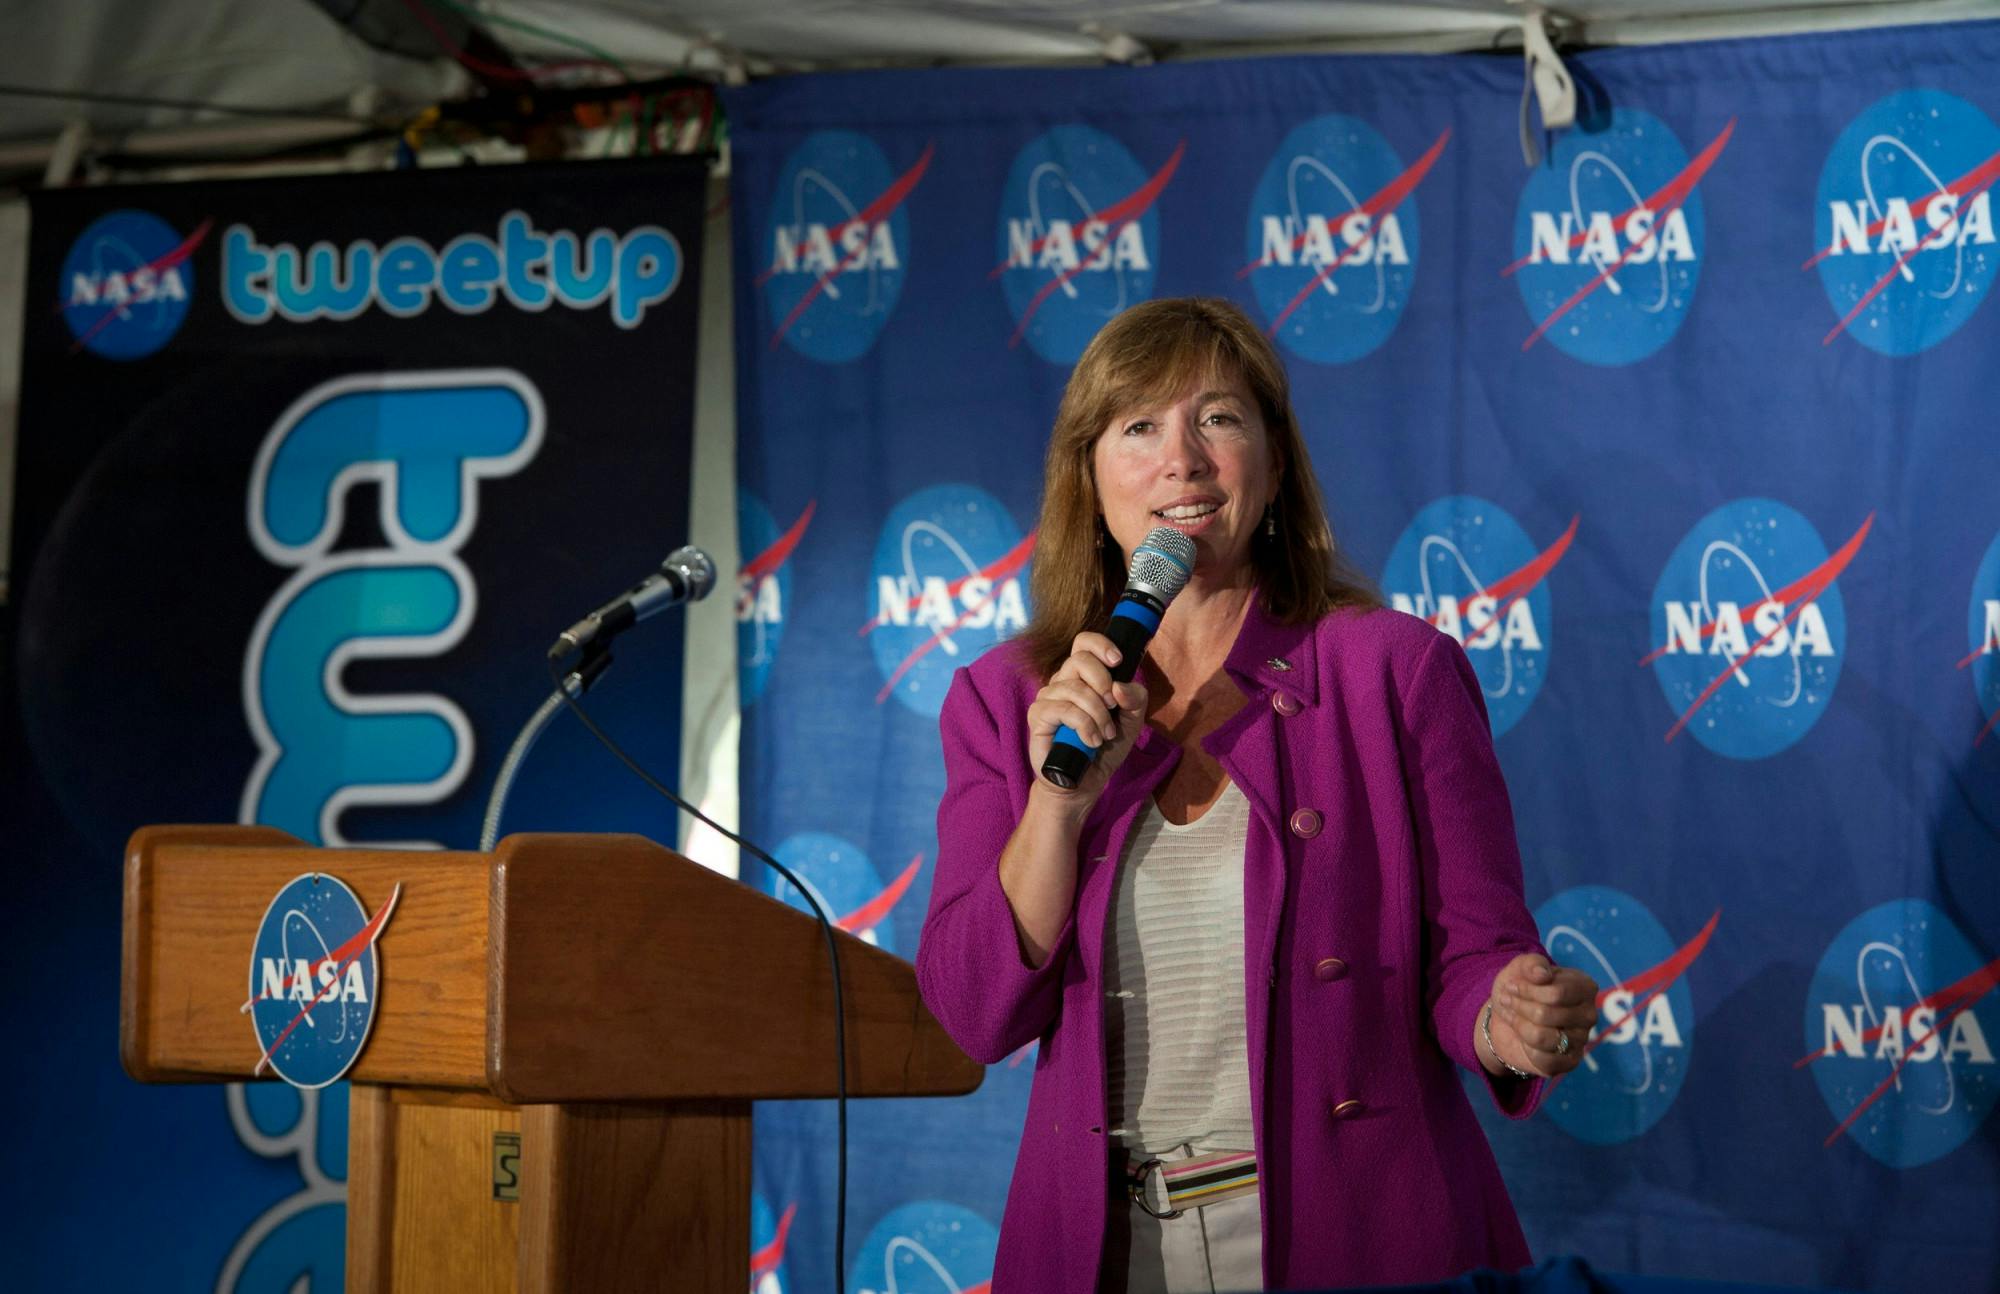 <p>NASA Deputy Administrator Lori Garver gives a welcoming message at the STS-135 Tweetup at Kennedy Space Center, Thursday, July 7, 2011 in Cape Canaveral, Fla. About 150 NASA Twitter followers attended the event. The STS-135 mission will be NASA's last space shuttle launch. Photo Credit: (NASA/Paul E. Alers)</p>